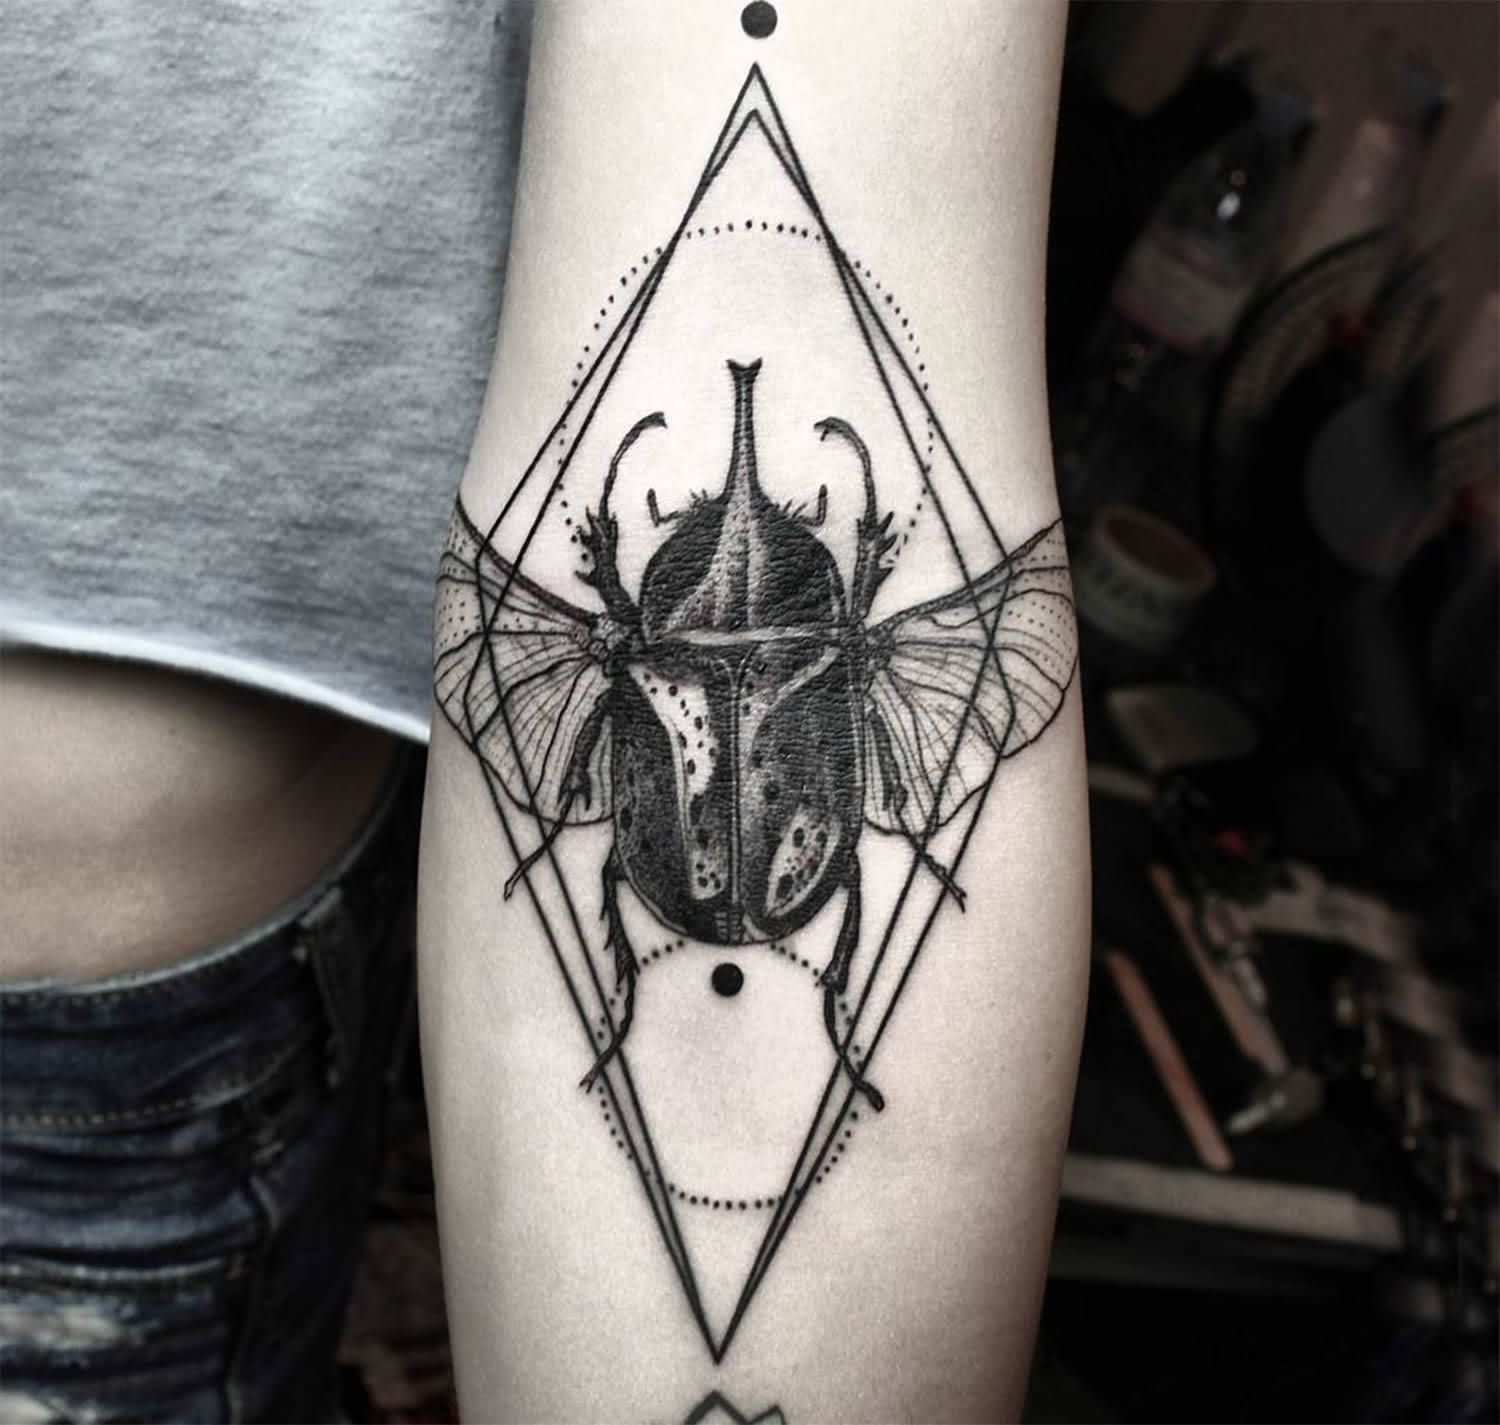 Black Ink Insect Tattoo On Left Forearm